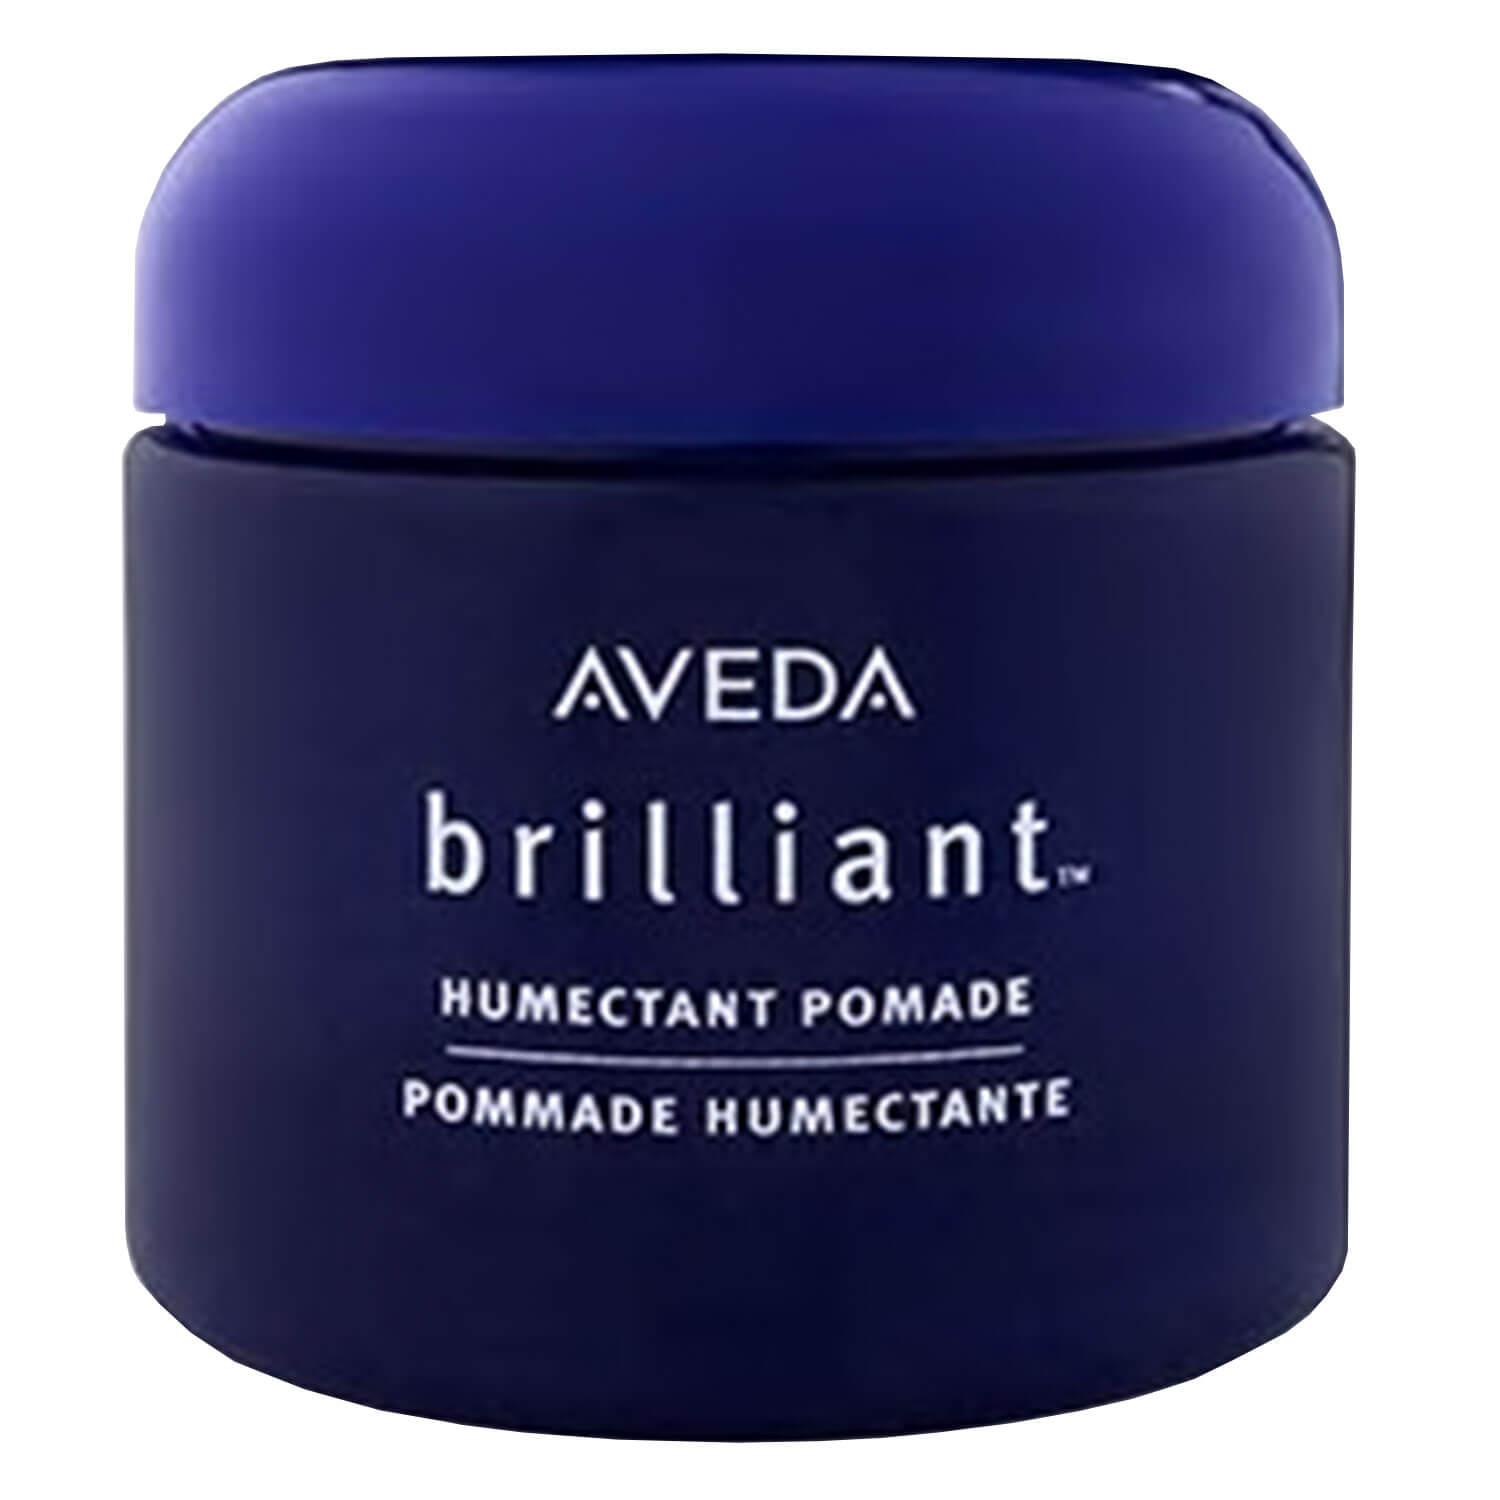 brilliant - humectant pomade